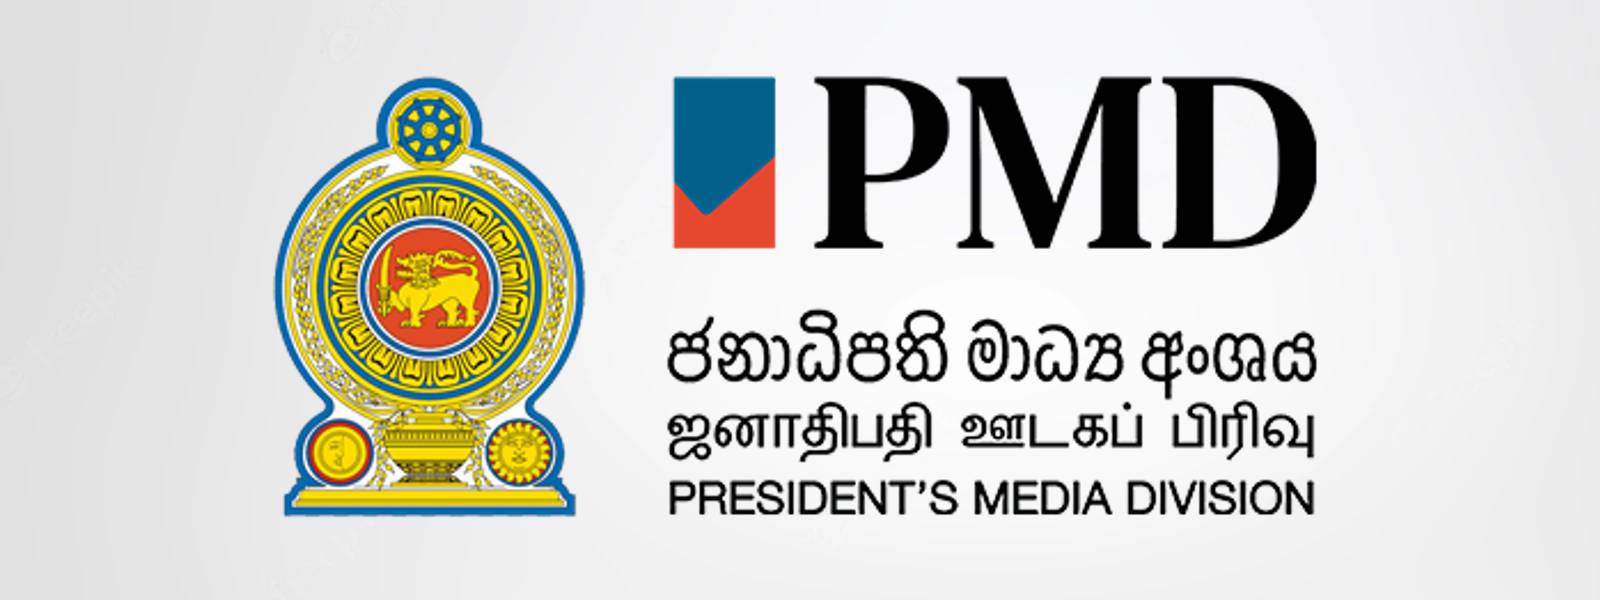 Medical aid through President's Fund to be raised